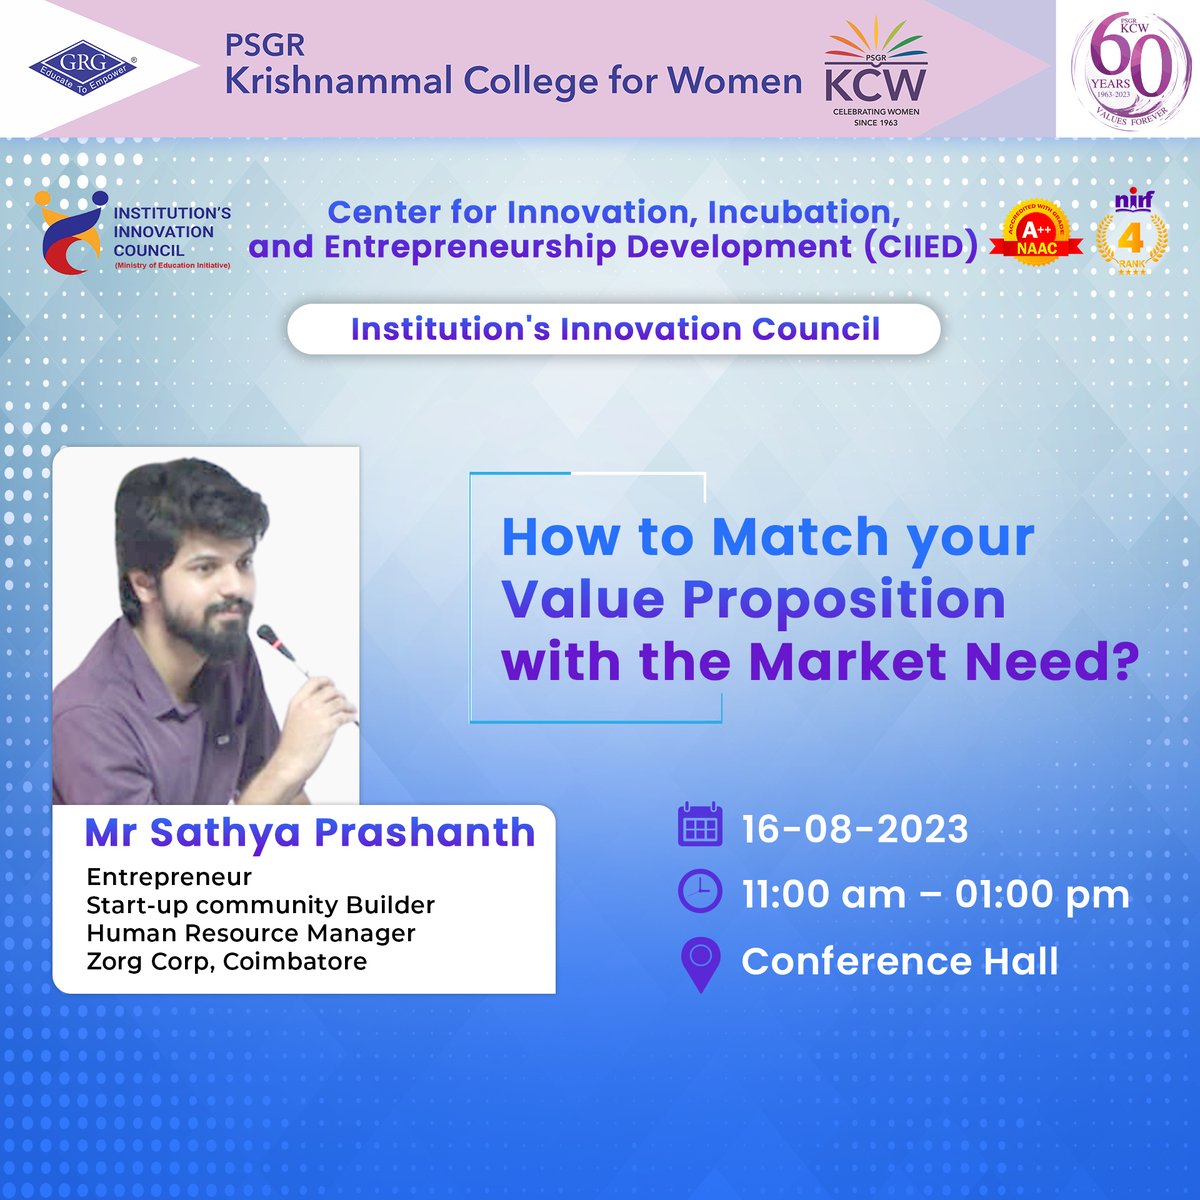 Join us on Aug 16, 2023, 11 am-1 pm for a talk on 'Matching Value Prop to Market Need' at Conference Hall, KCW. 🎙️ Insights by Mr. Sathya Prashanth, Entrepreneur | Start-up Community Builder Dr. N. Priyadharsini, Assistant Prof & IIC Convenor, presiding. Don't miss! #ValueProp